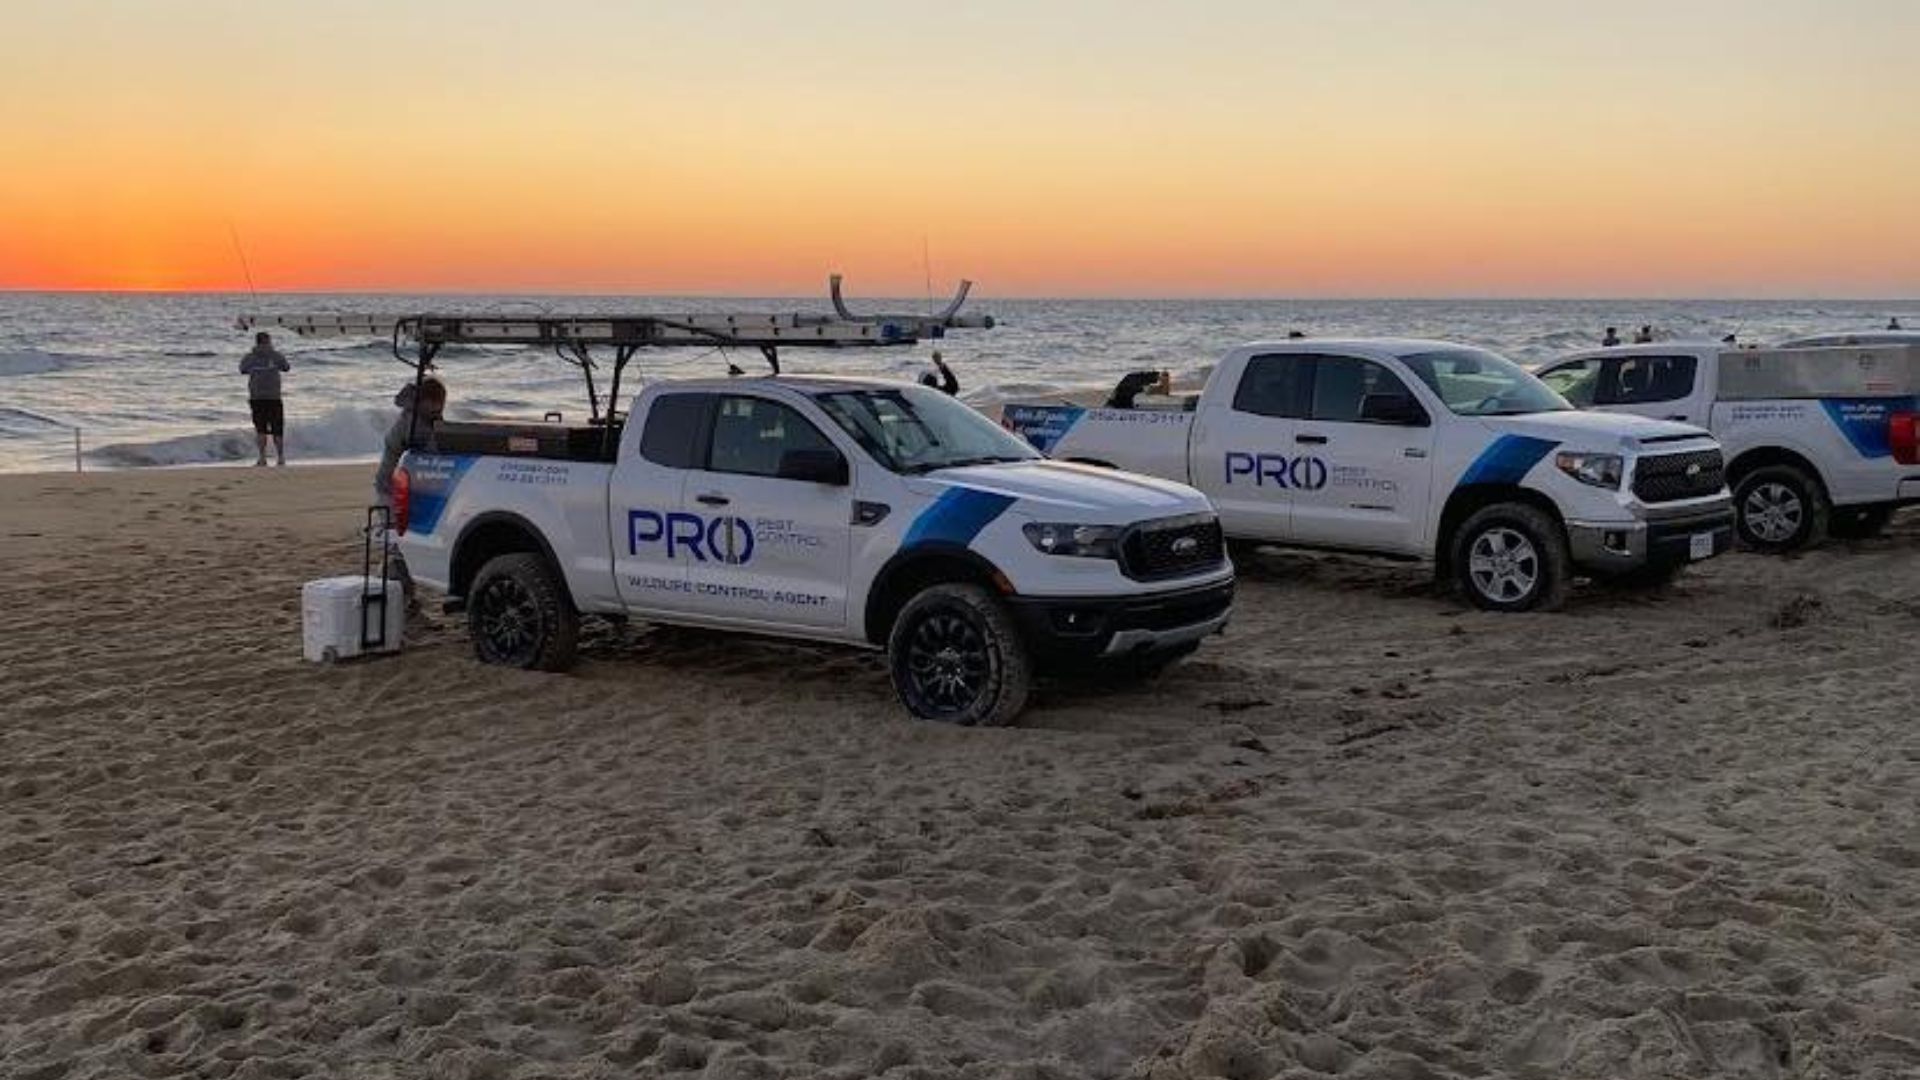 Pro 1 Pest Control's fleet of  technicians travel from the Outer Banks across Northeastern North Carolina to provide high-quality treatments to common pest problems for homes and businesses.